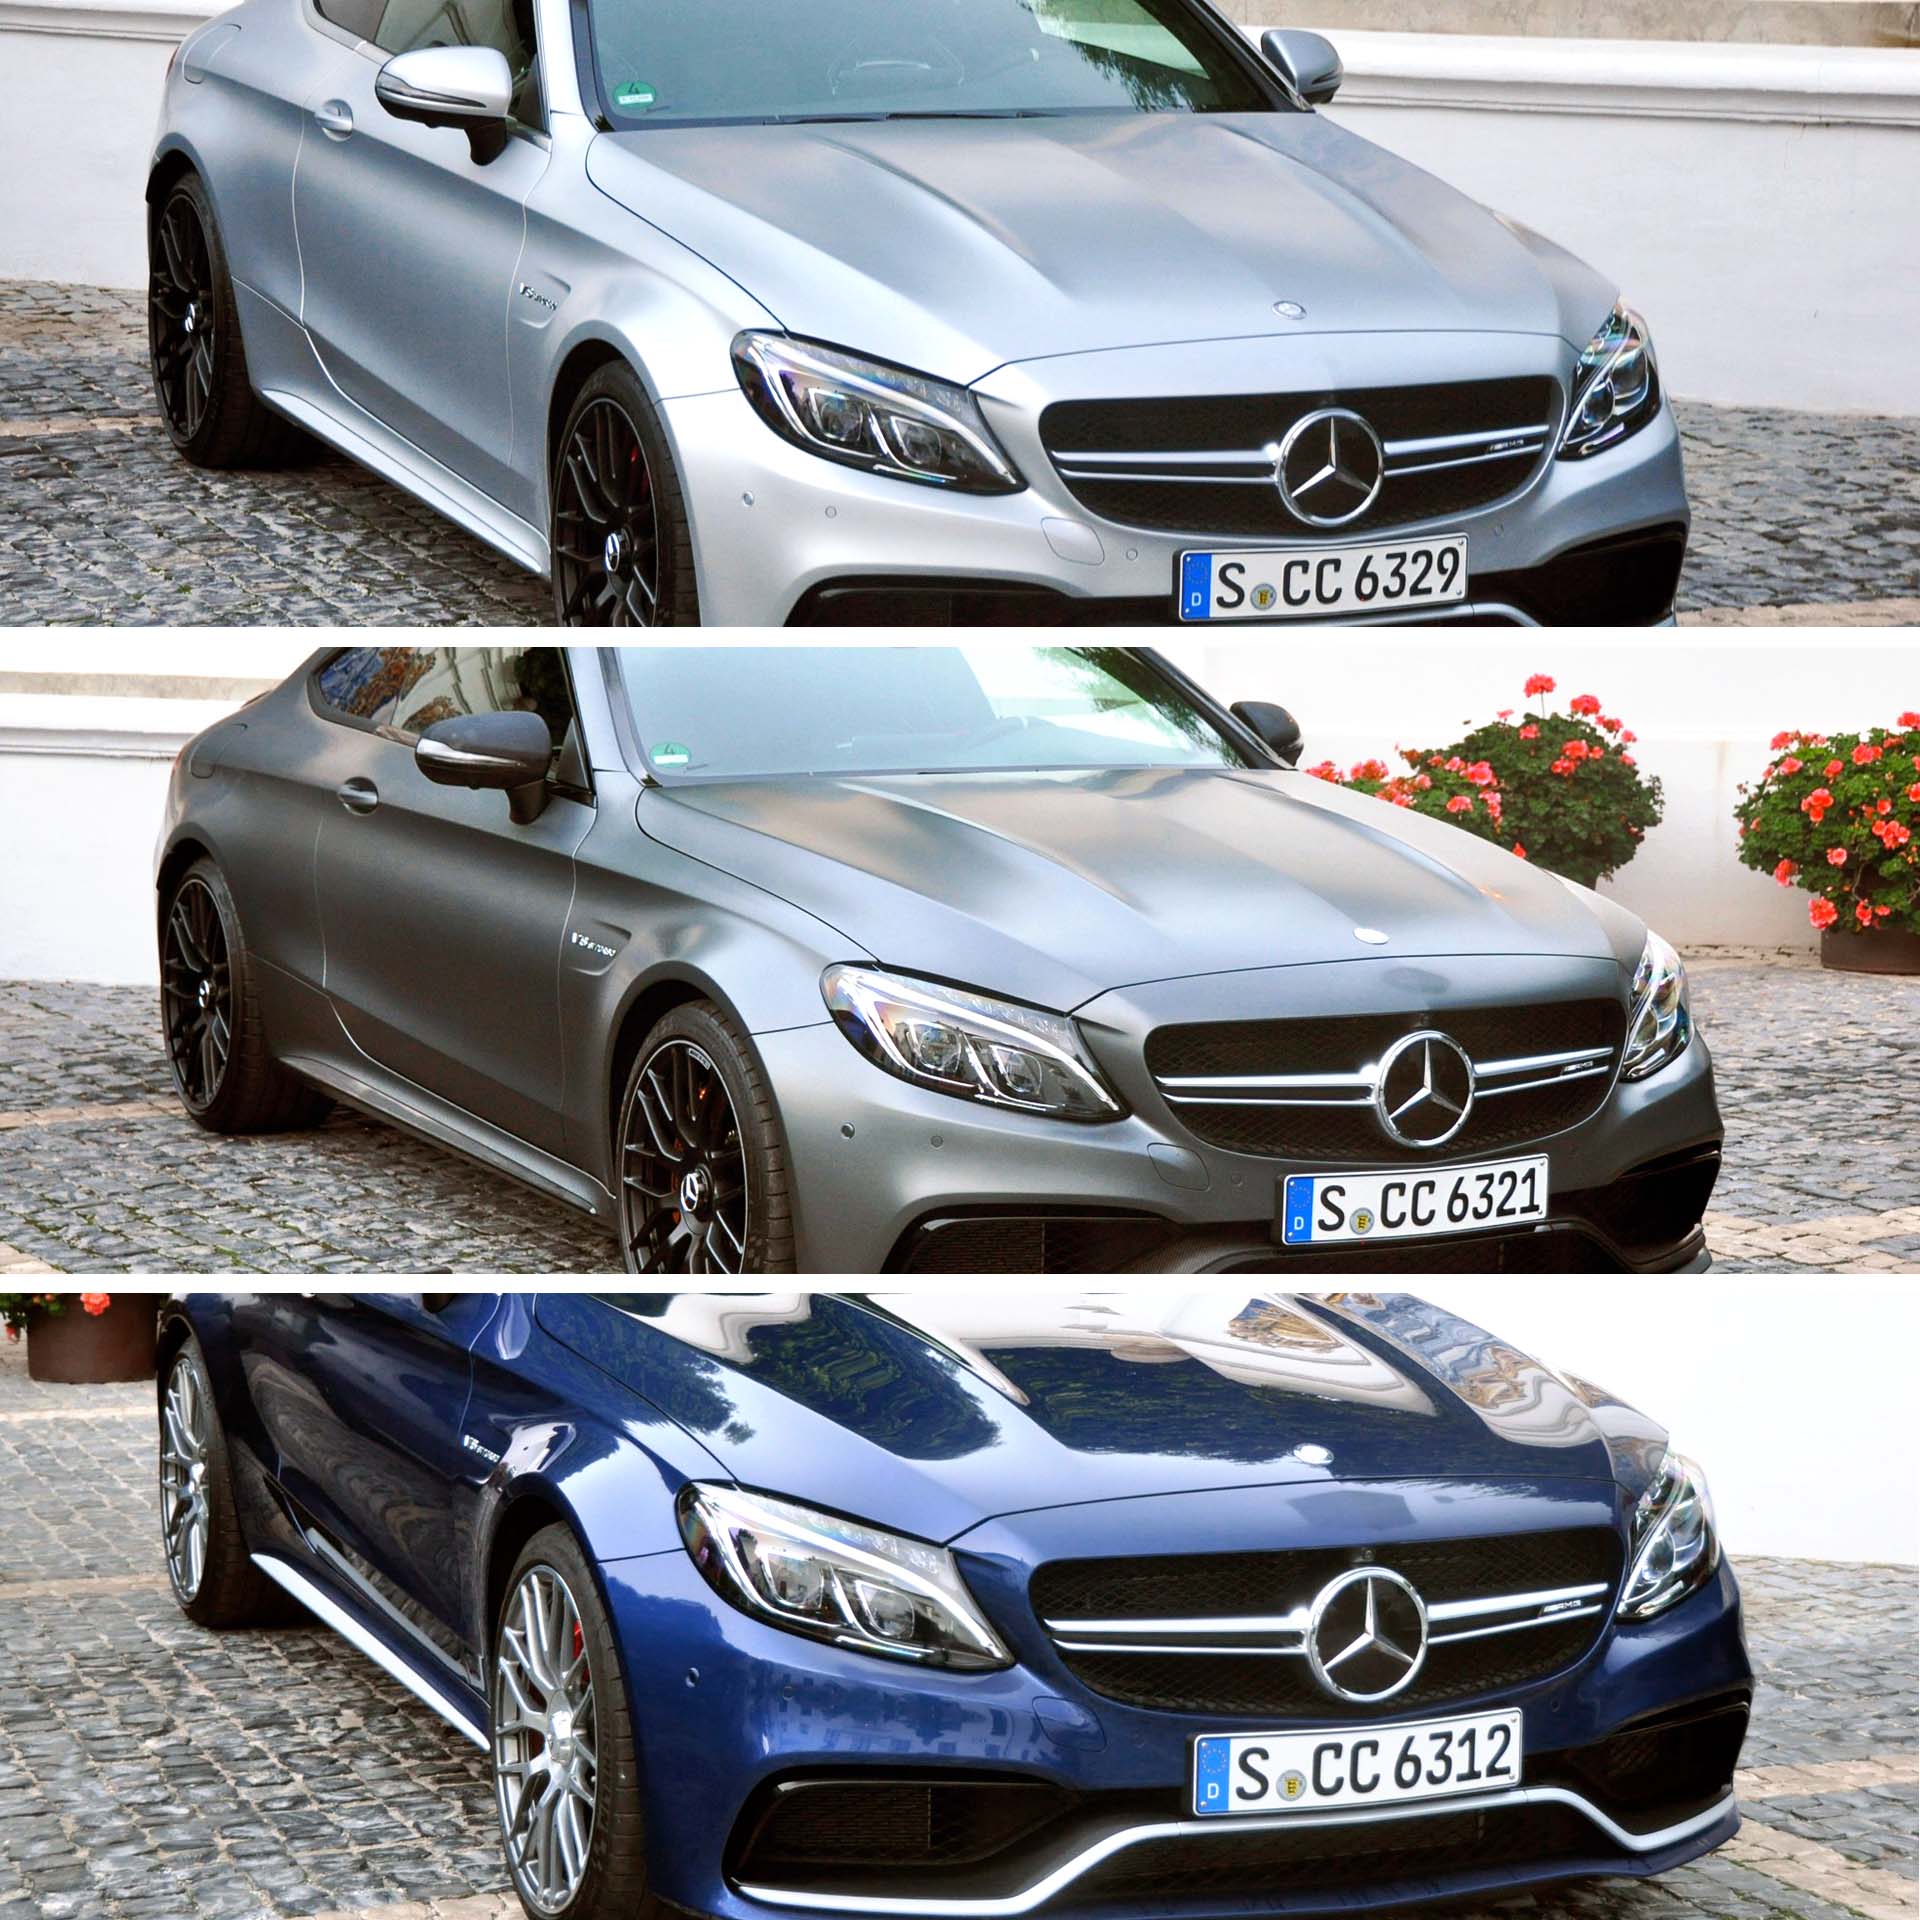 Back on public roads, you can enjoy the C 63 within limits. Passing? In a heartbeat. This is a supercar, remember – light and agile – with enough horsepower (when you think about it) to propel three mainstream vehicles. But these cars look great standing still as well. Here are three colour choices. Hard to pick!